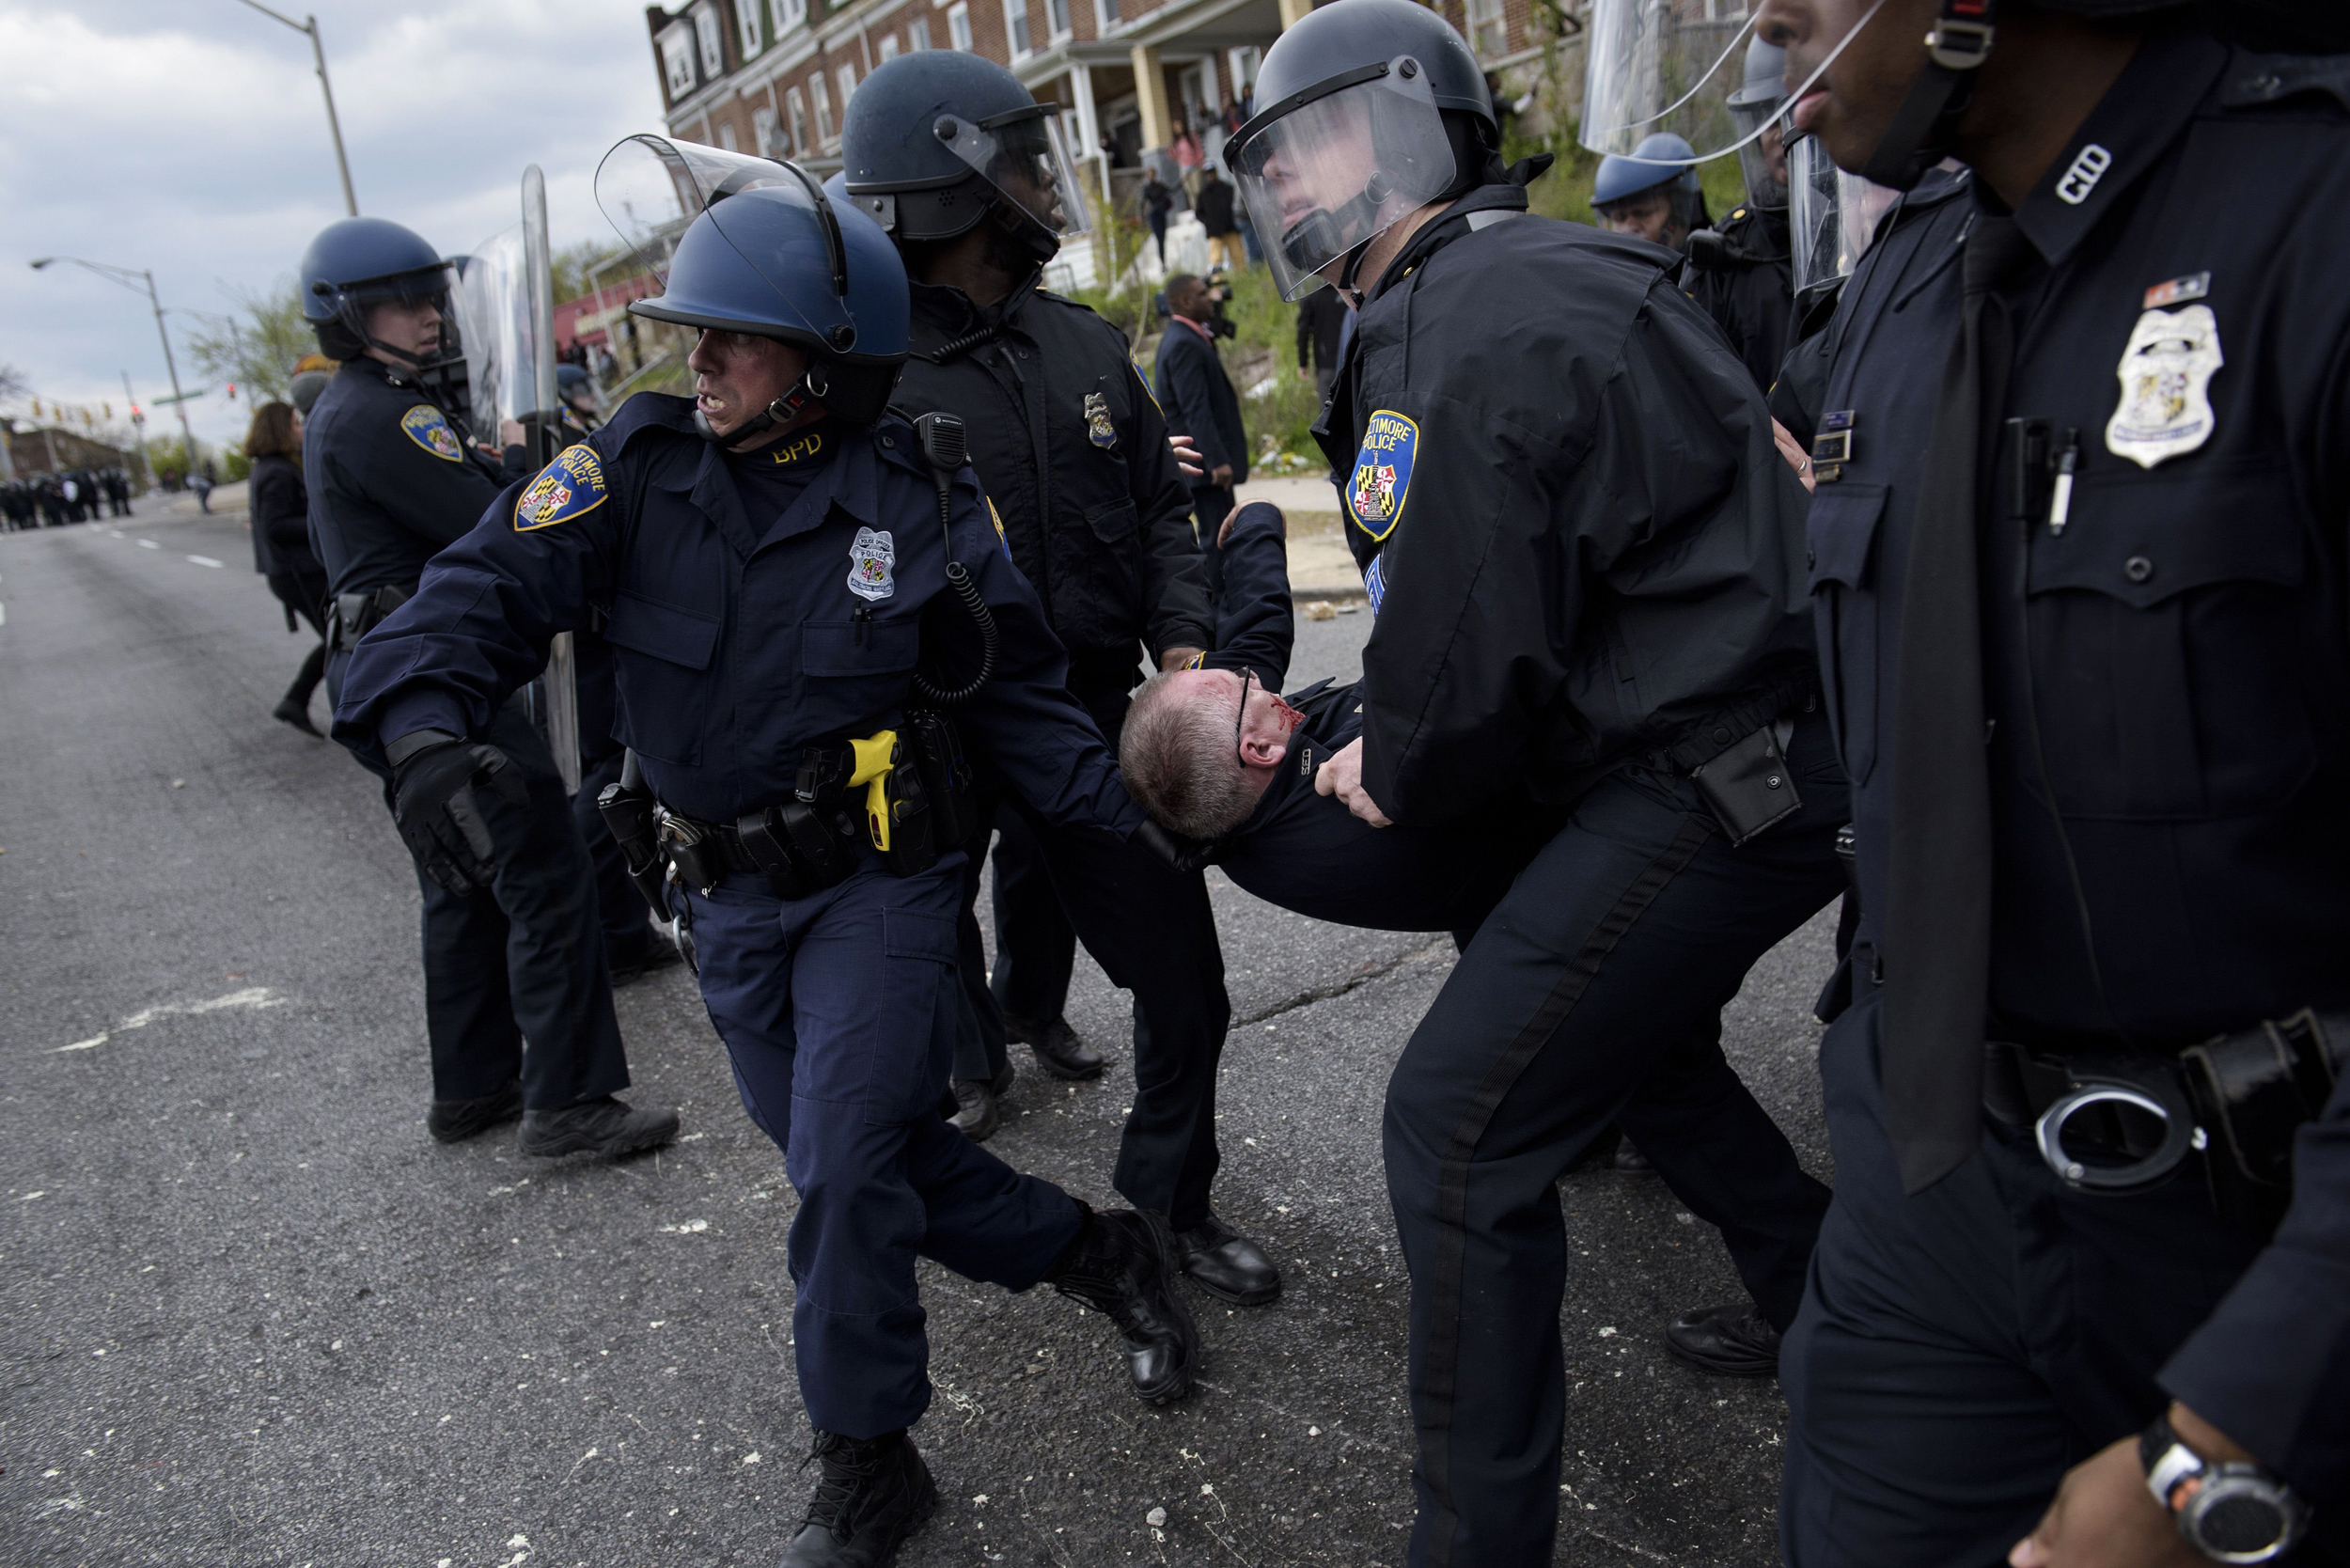 Baltimore Erupts in Violence After Freddie Gray Funeral - NBC News.com